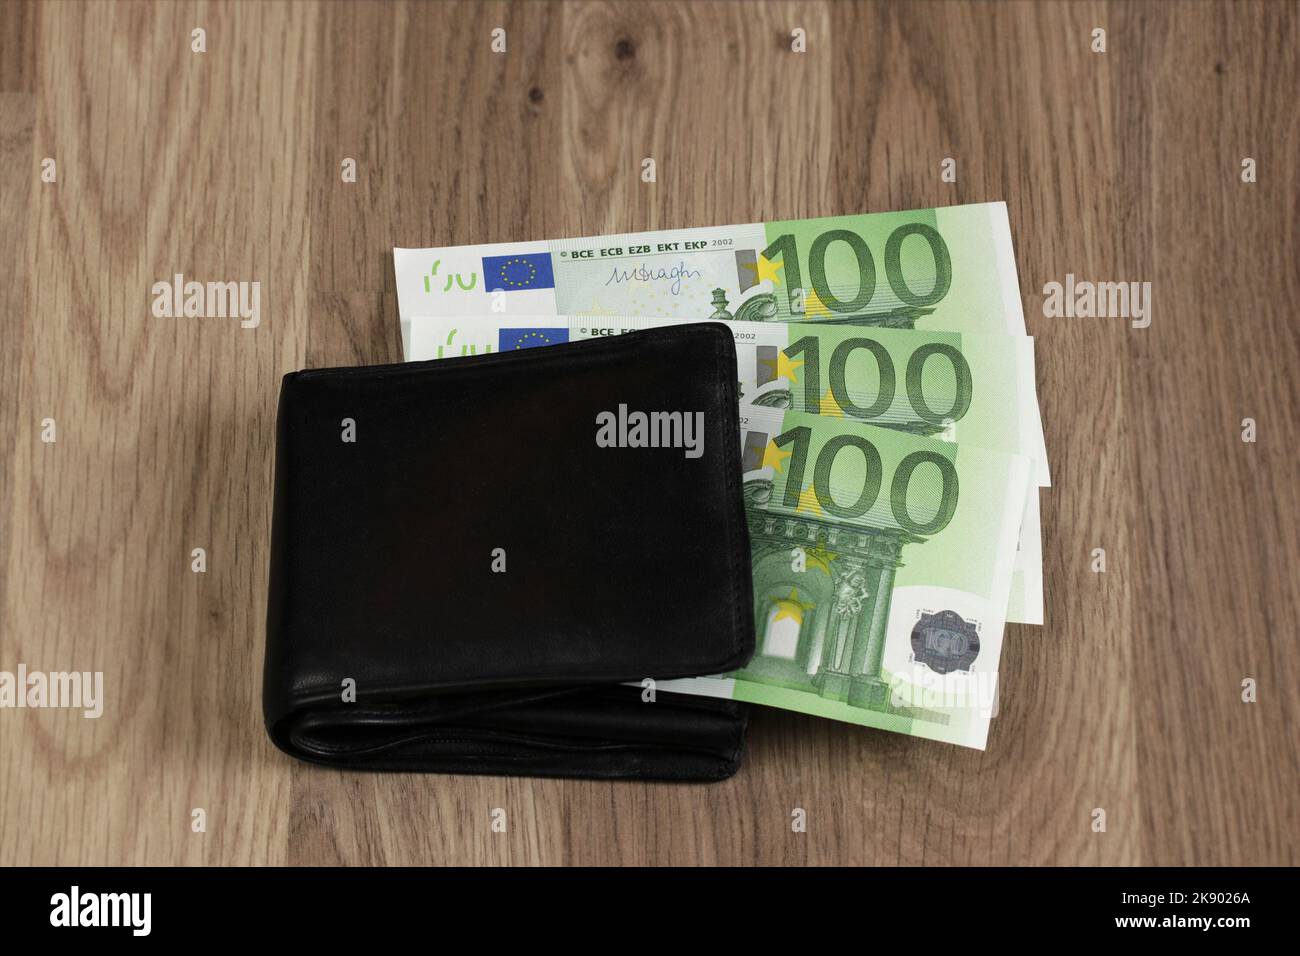 300 euros sticking out of the wallet. Three paper banknotes of 100 euros each. Symbol for growing expenses, inflation, paying household bills, salary. Stock Photo